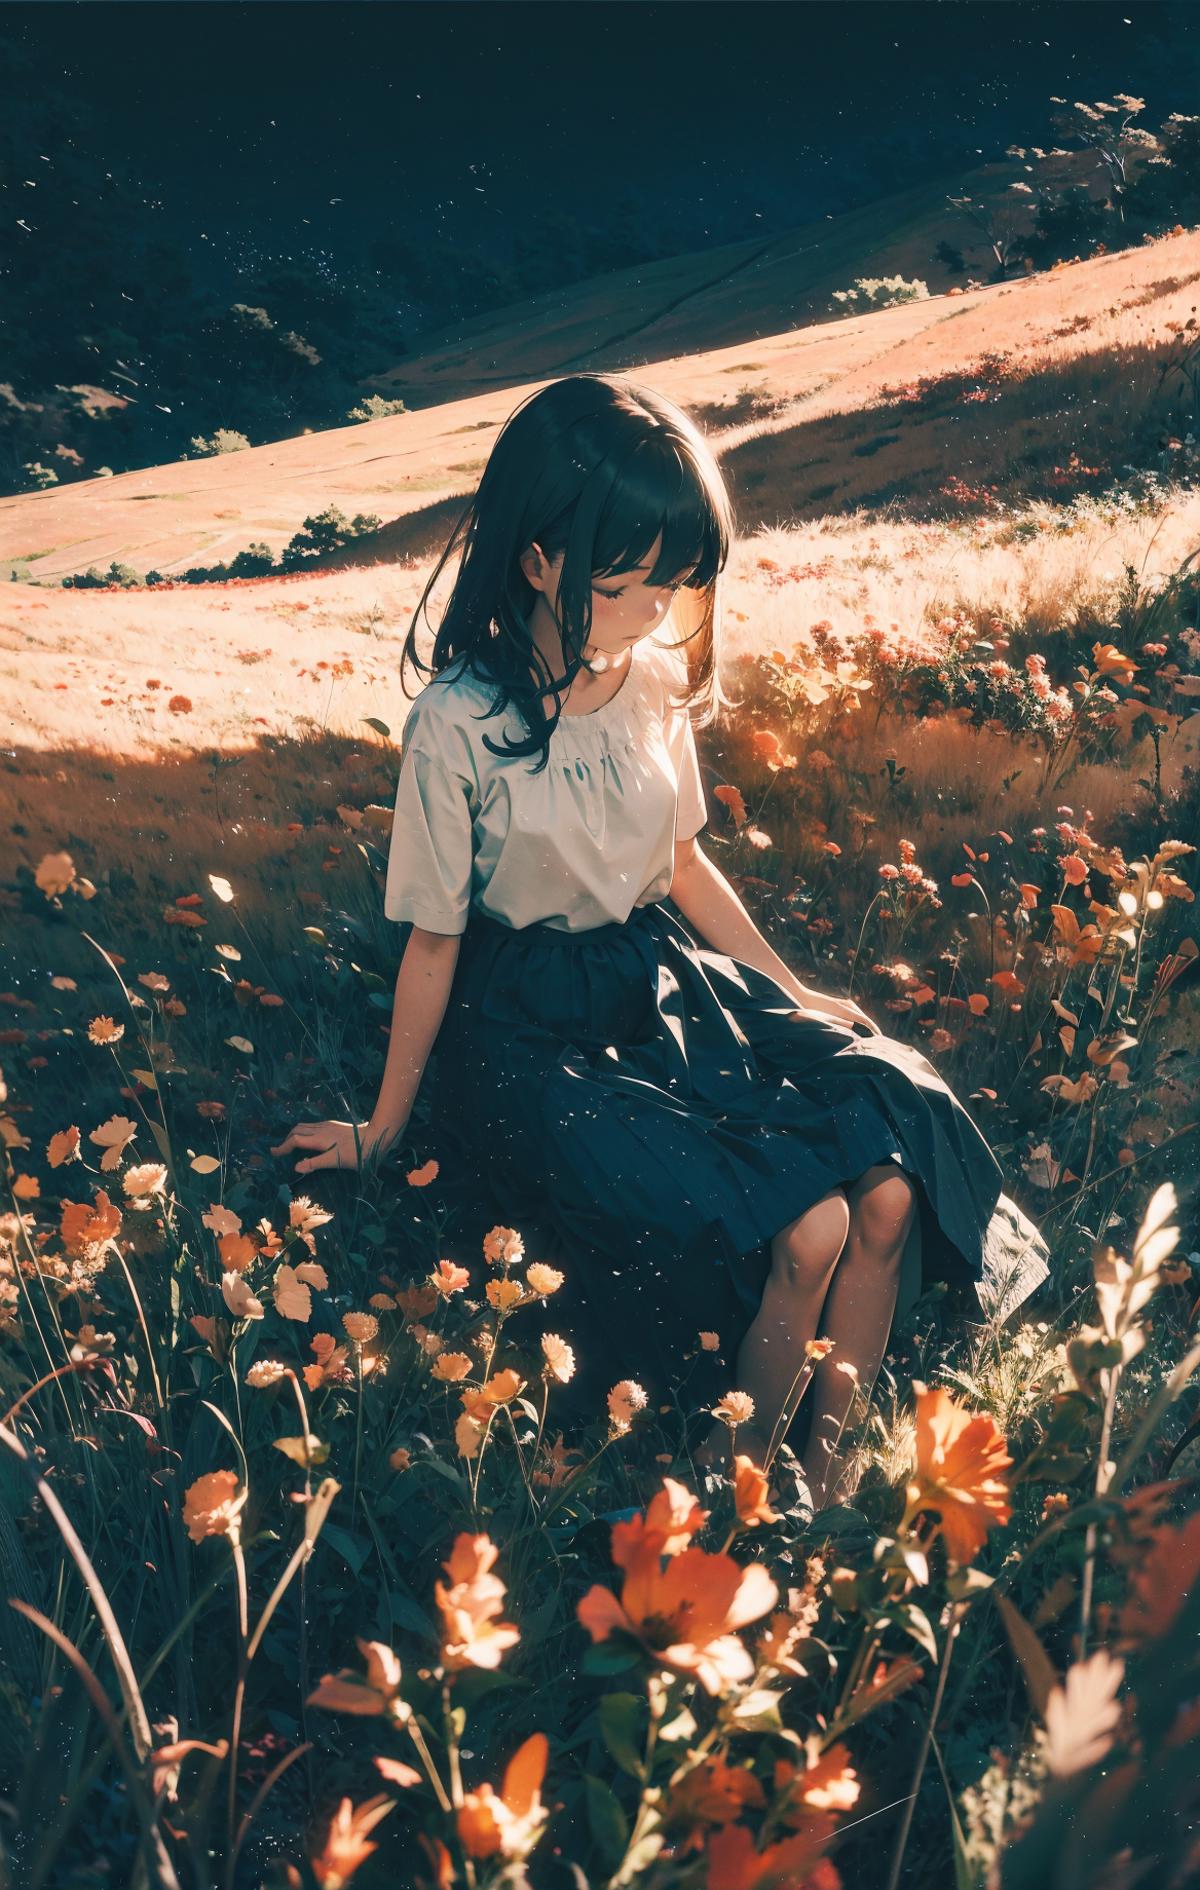 Anime girl sitting in a field of flowers with a blue dress.